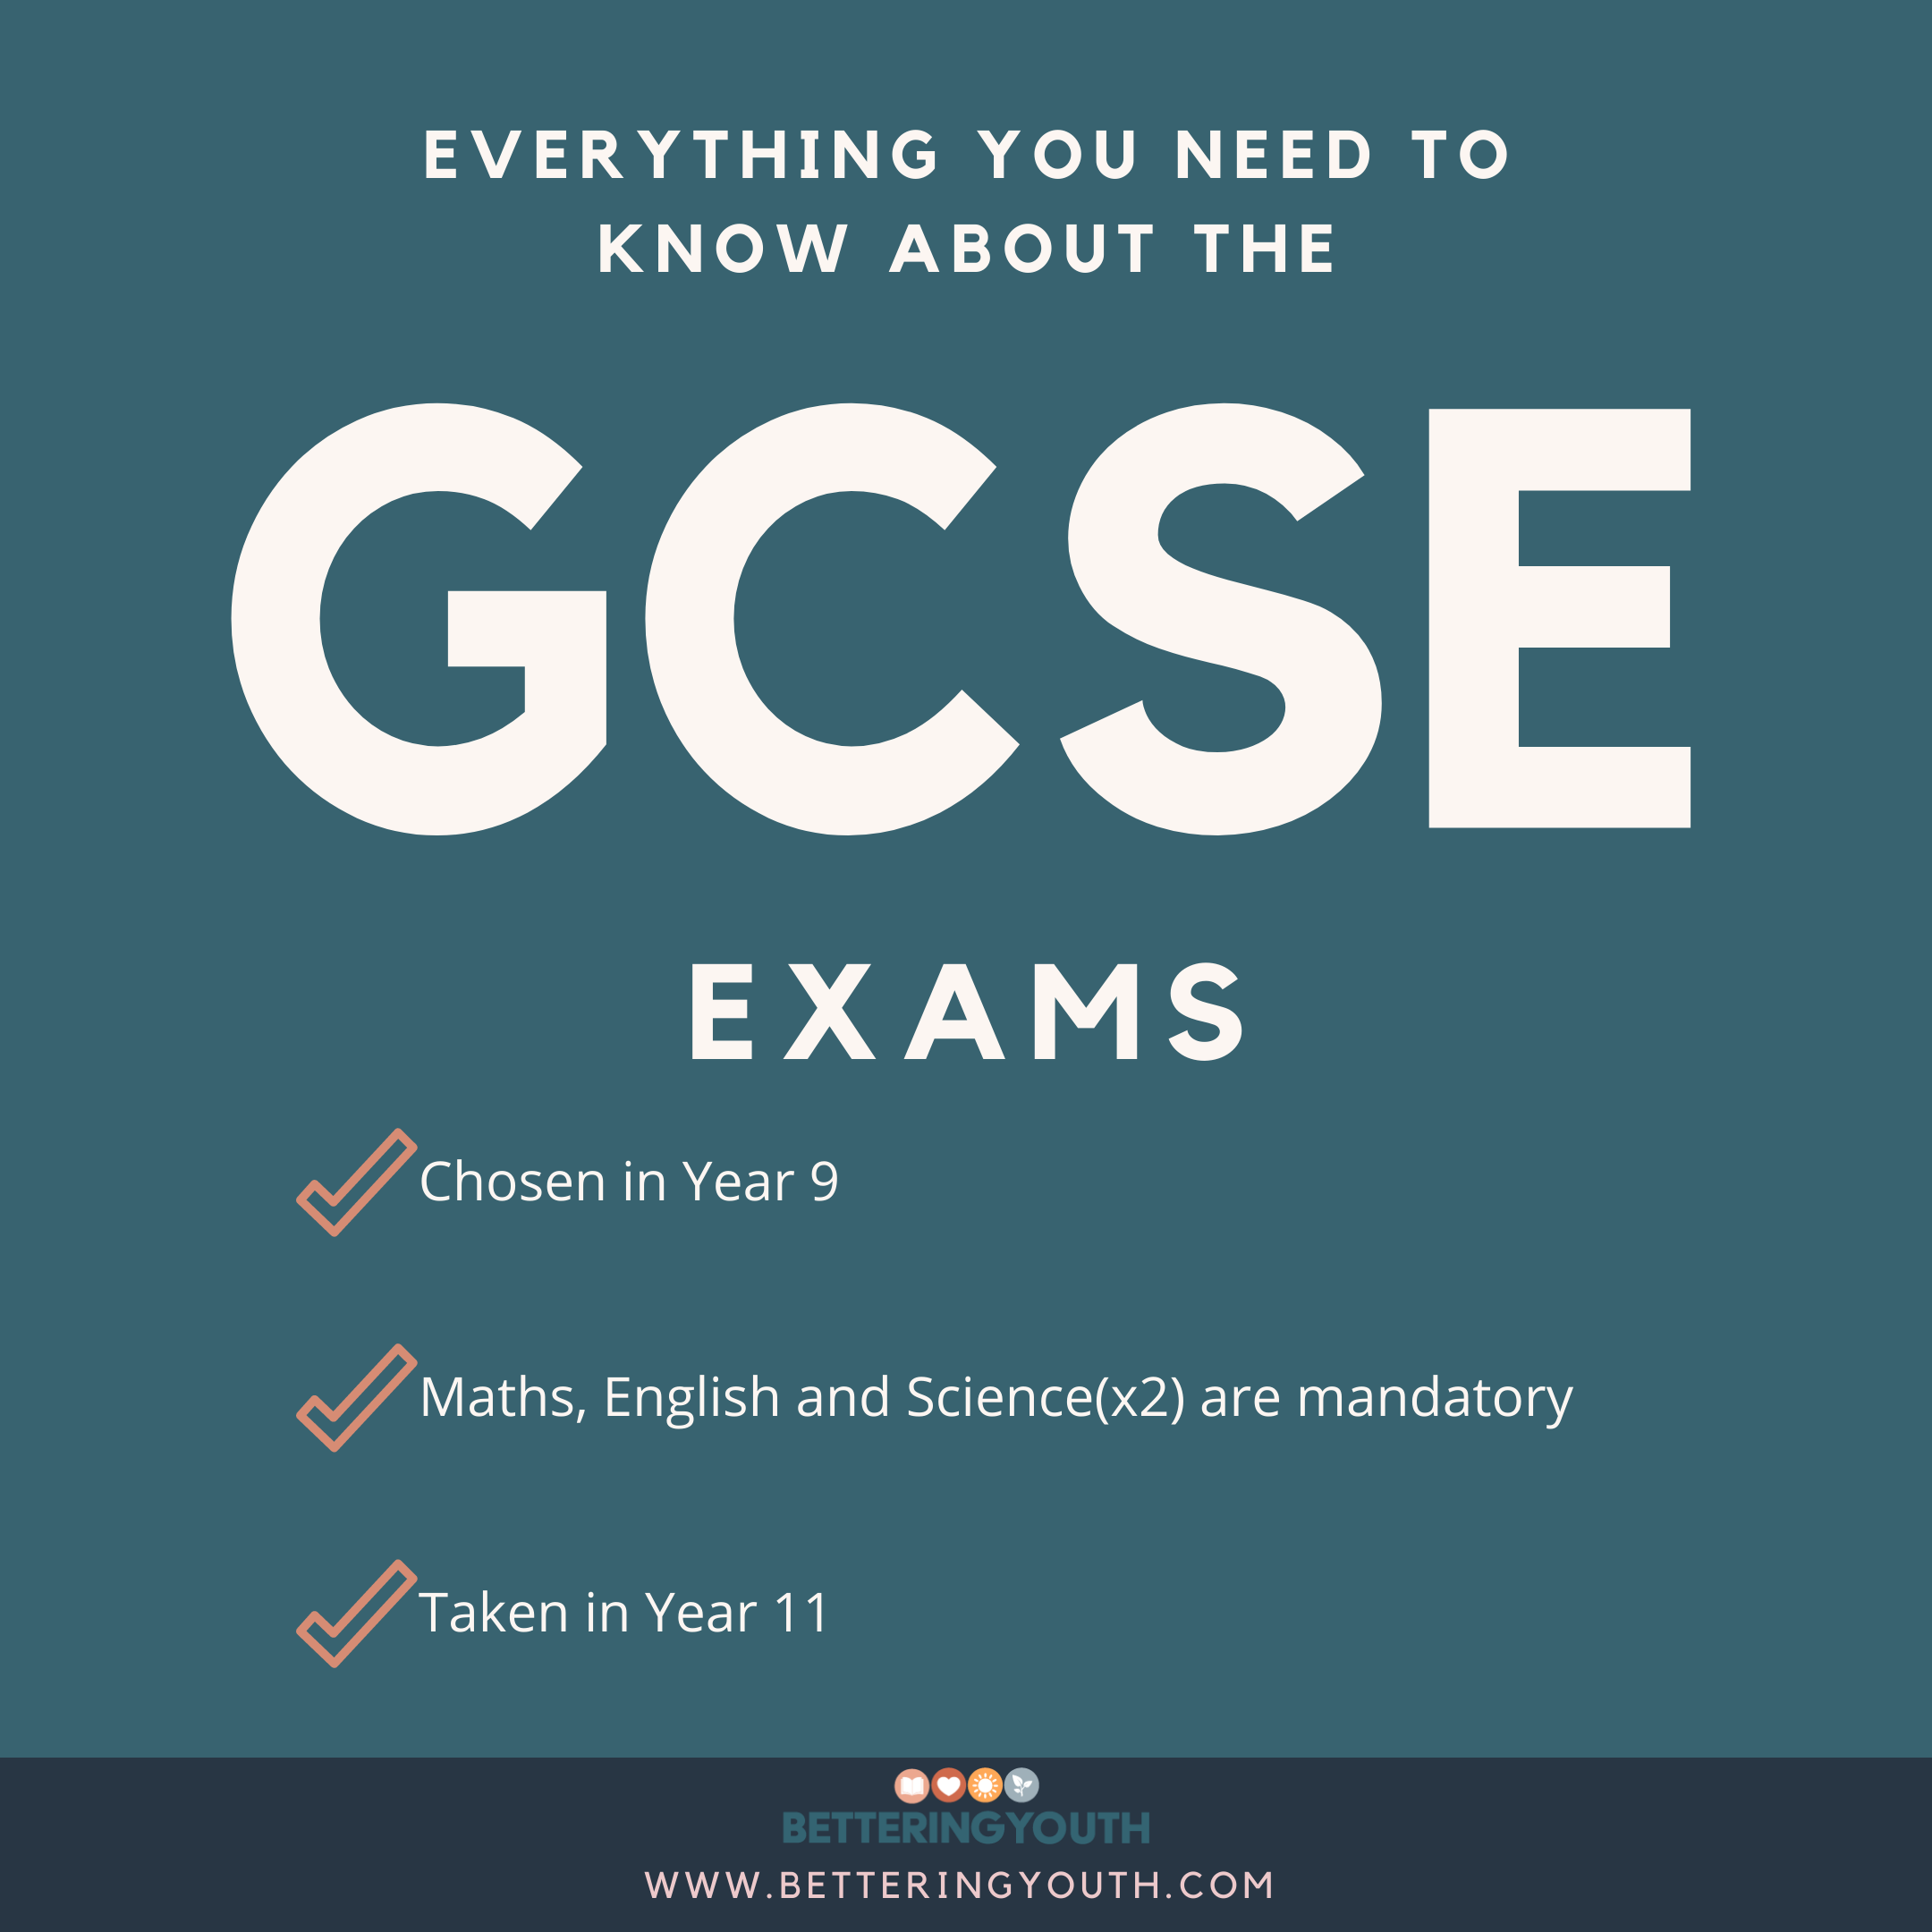 All you need to know about GCSEs